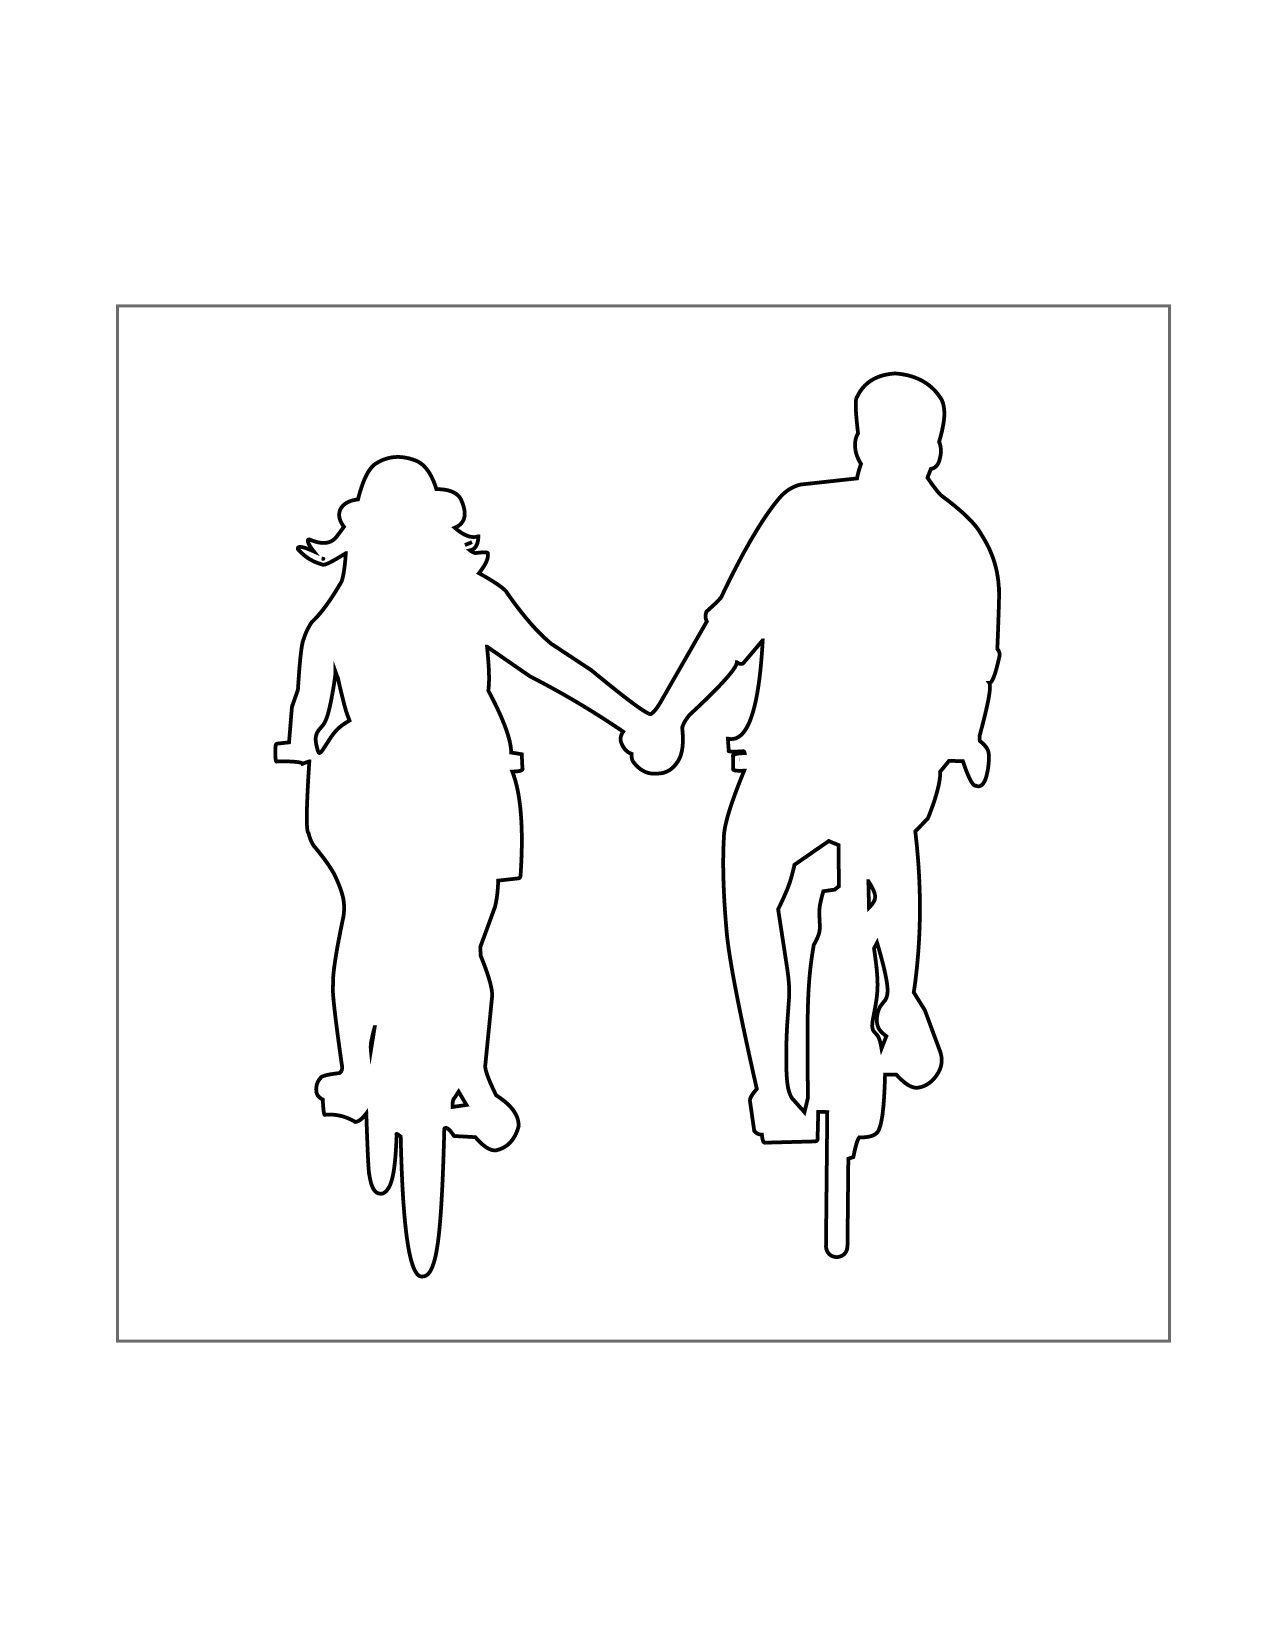 Couple Holding Hands Riding Bikes Coloring Page